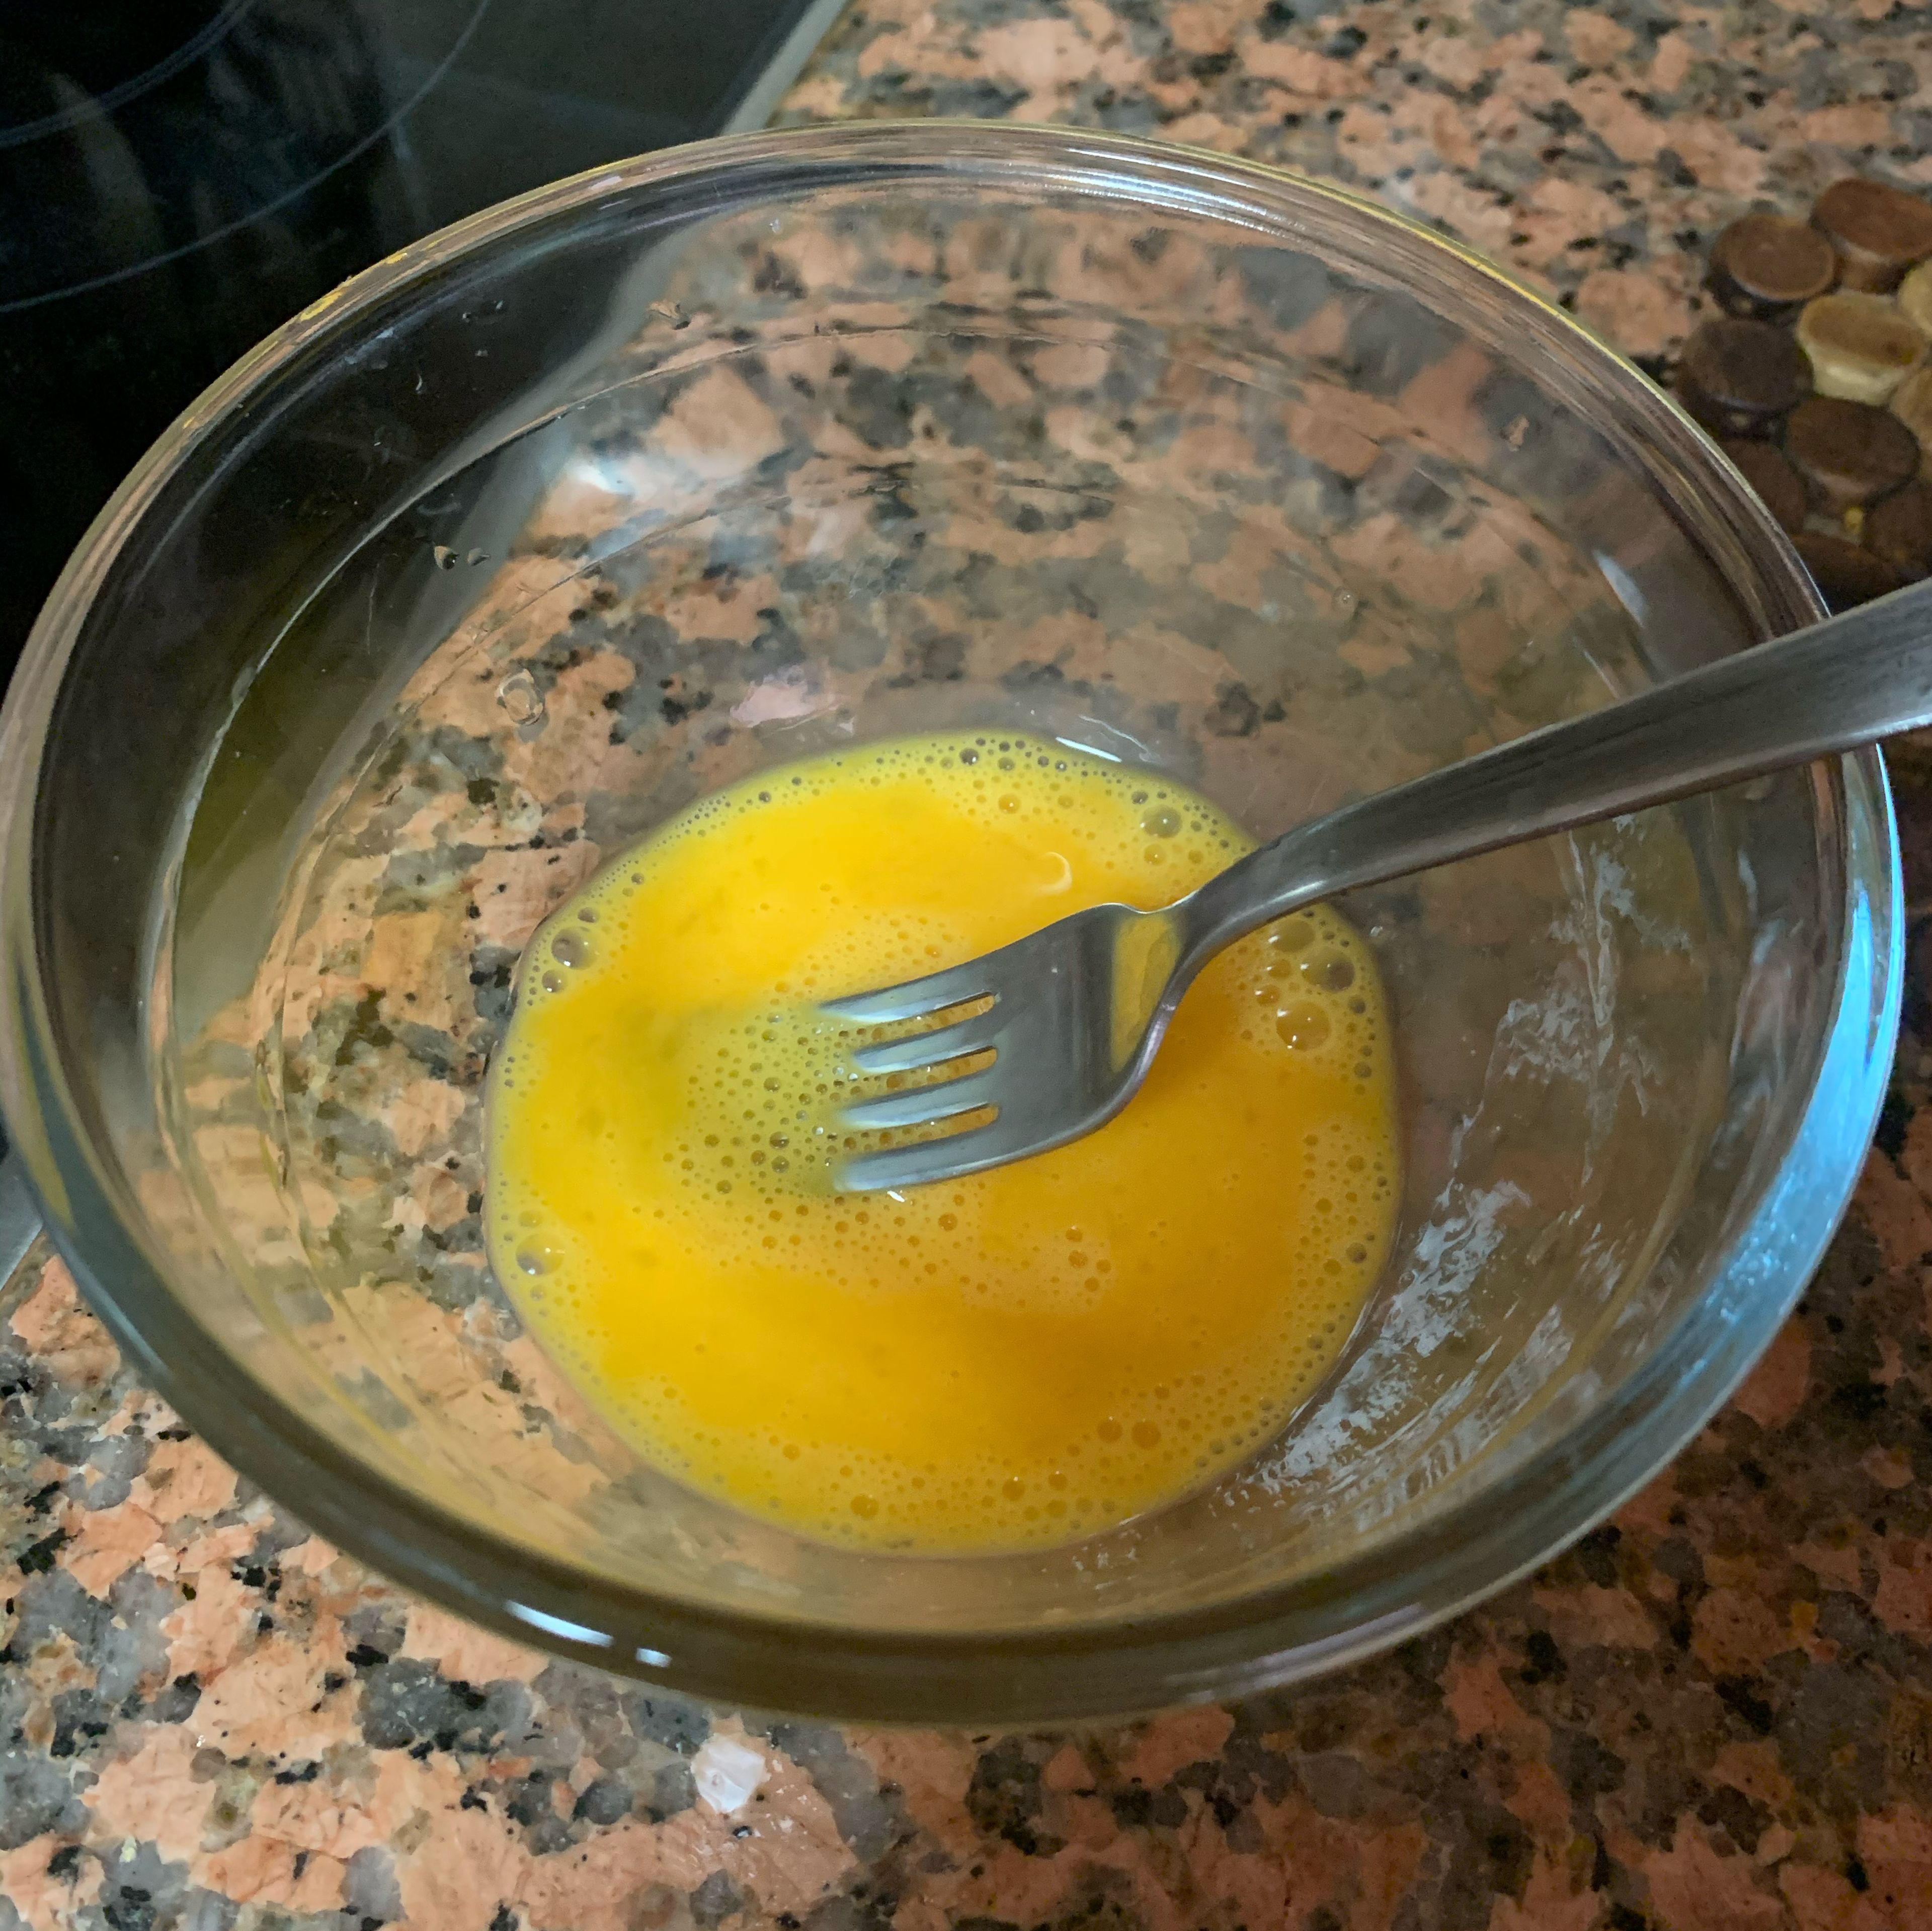 Put the egg into a bowl and whisk it well